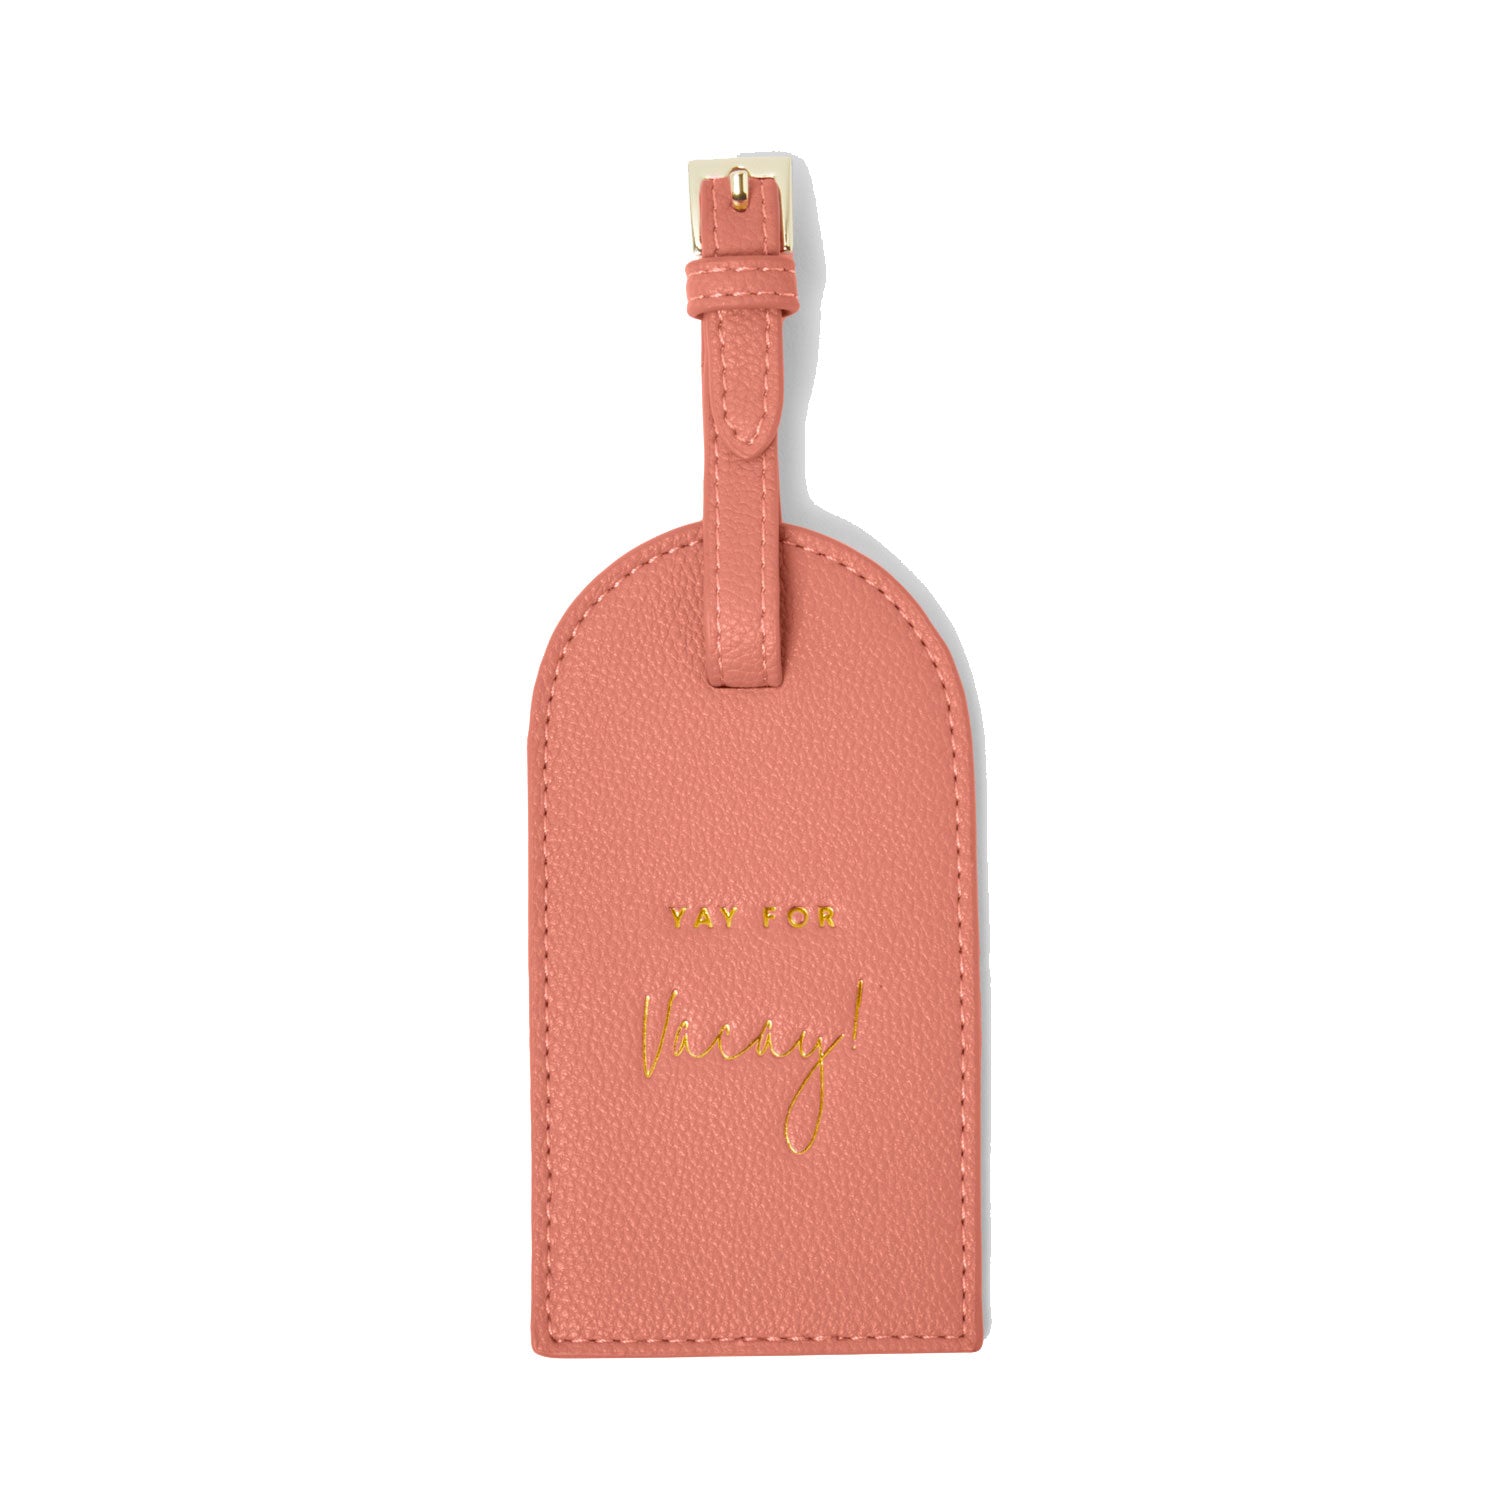 Katie Loxton Travel Accessories Katie Loxton Luggage Tag - Yay for Vacay - Coral